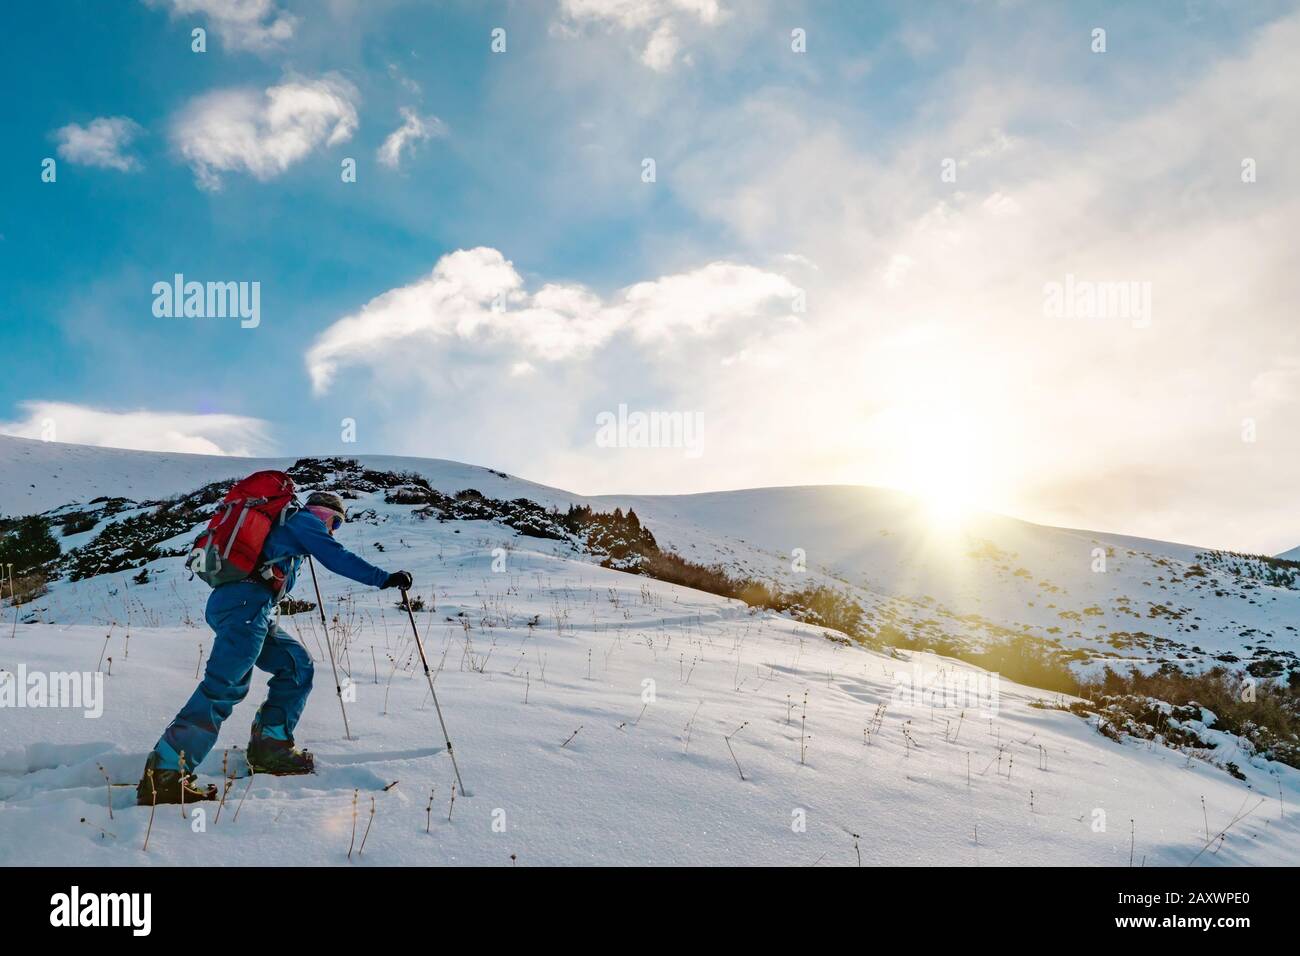 A man is engaged in skituring on split snowboarding. Sunrise is sunny in the mountains. Kyrgyzstan Stock Photo